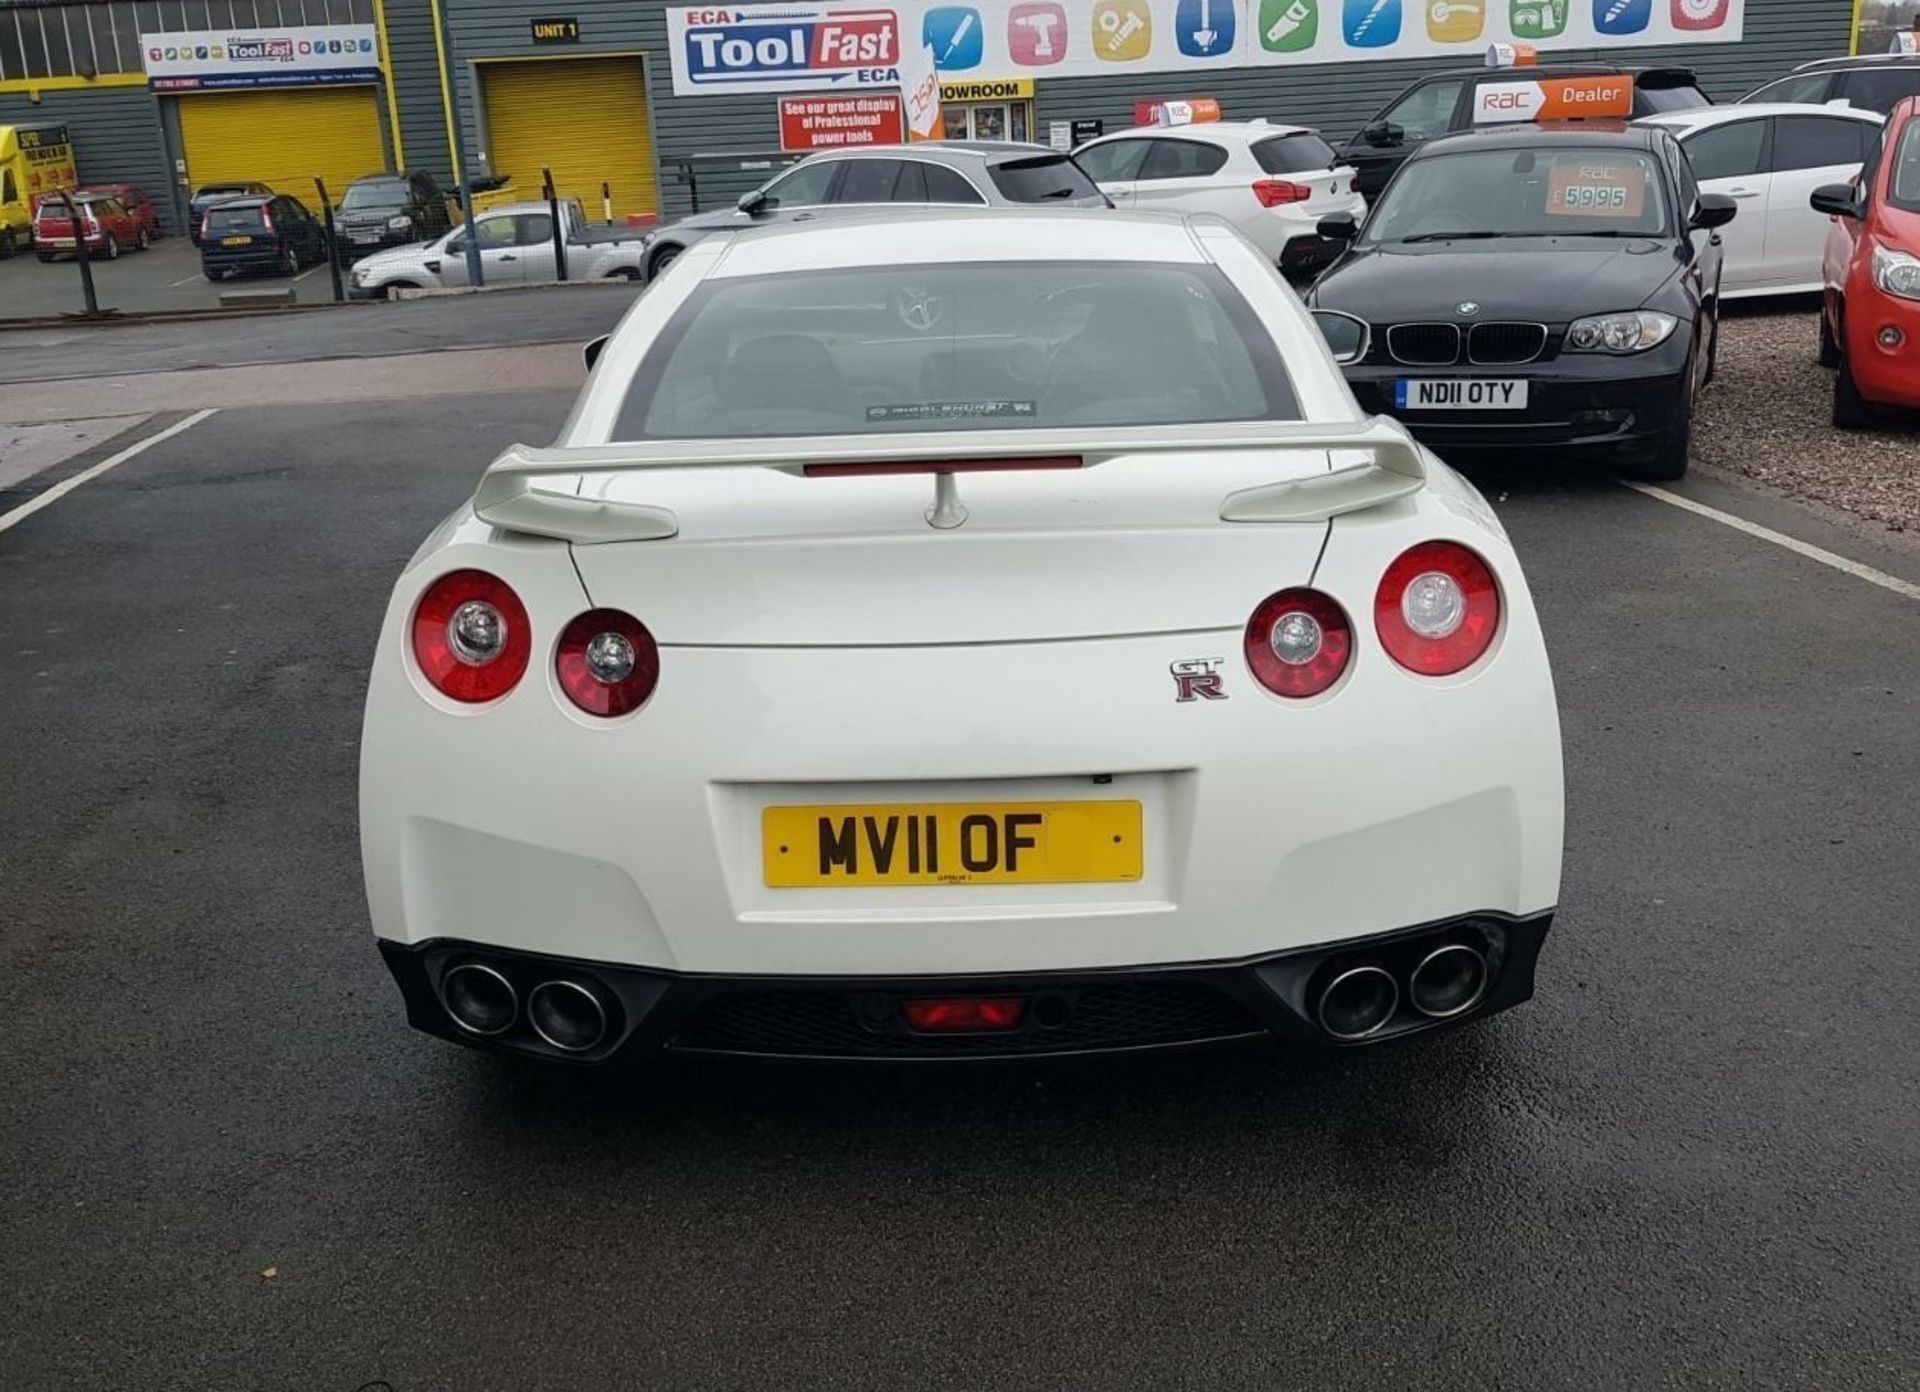 2011 NISSAN GT-R R35 750 stage 5 PREMIUM EDITION S-A 1 OWNER FROM NEW 19.5K MILES WARRANTED! no vat - Image 5 of 7